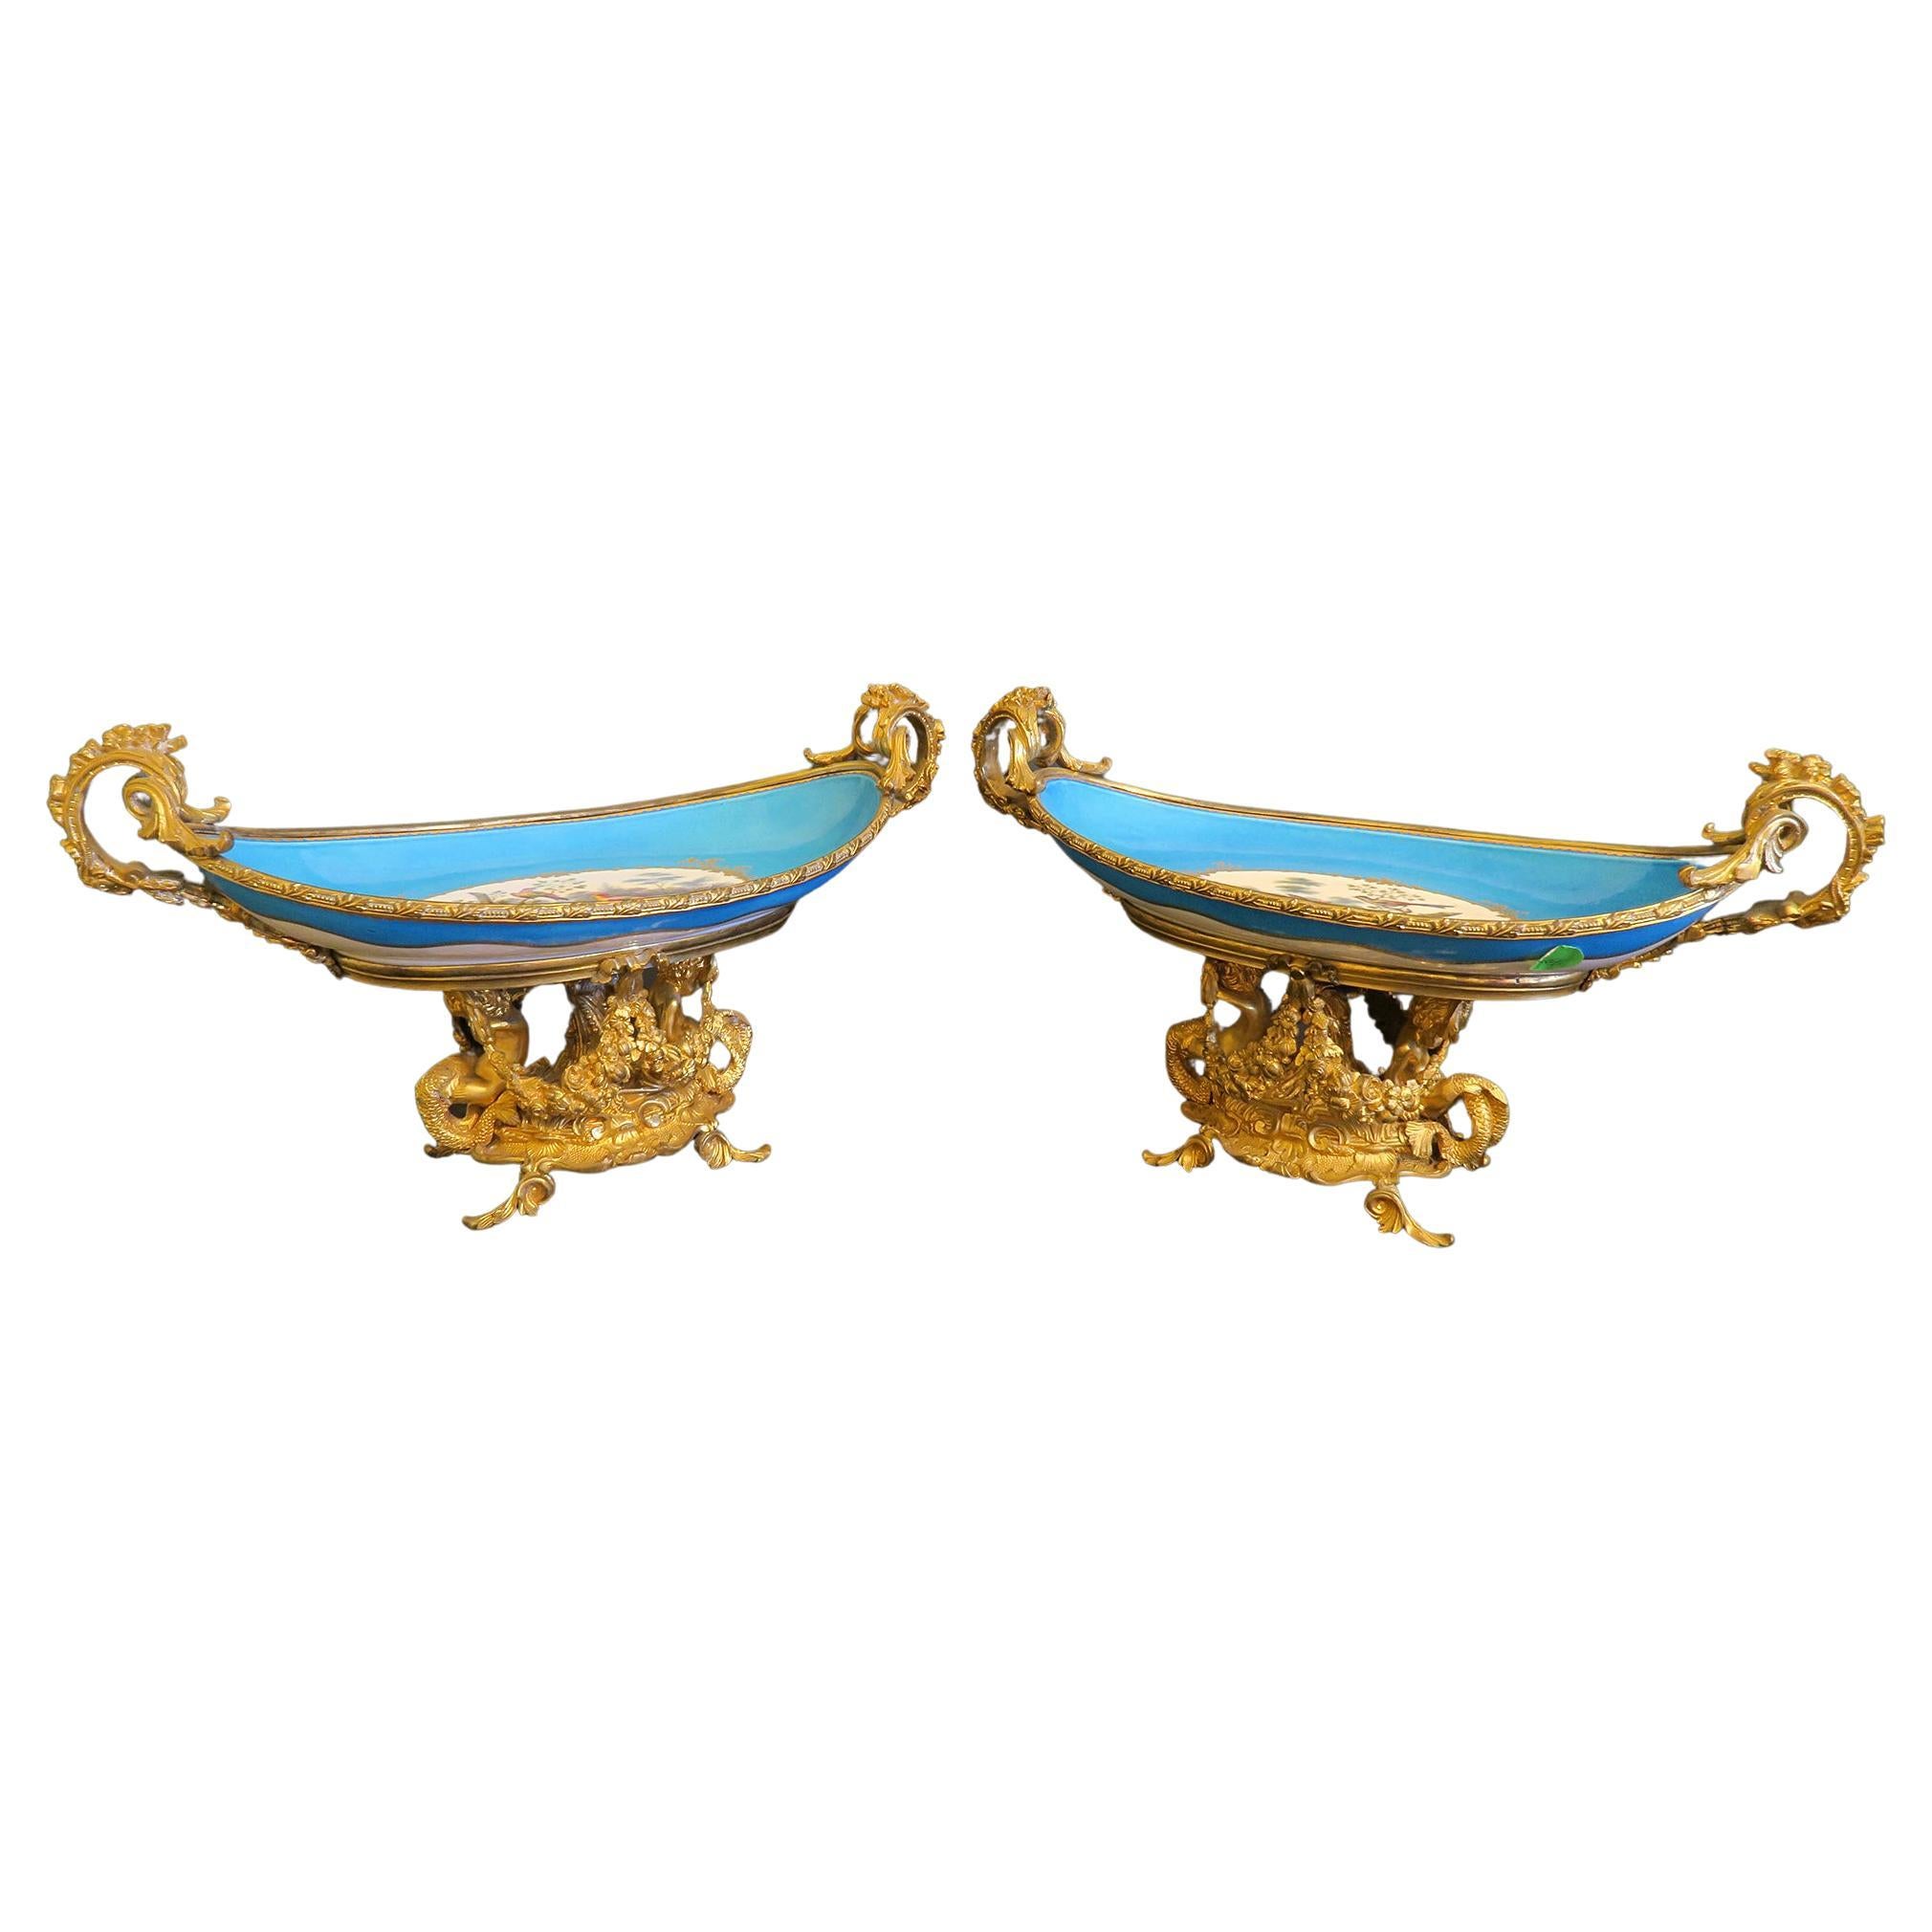 Pair Of French Ormolu Mounted Sevres Porcelain Centerpieces For Sale